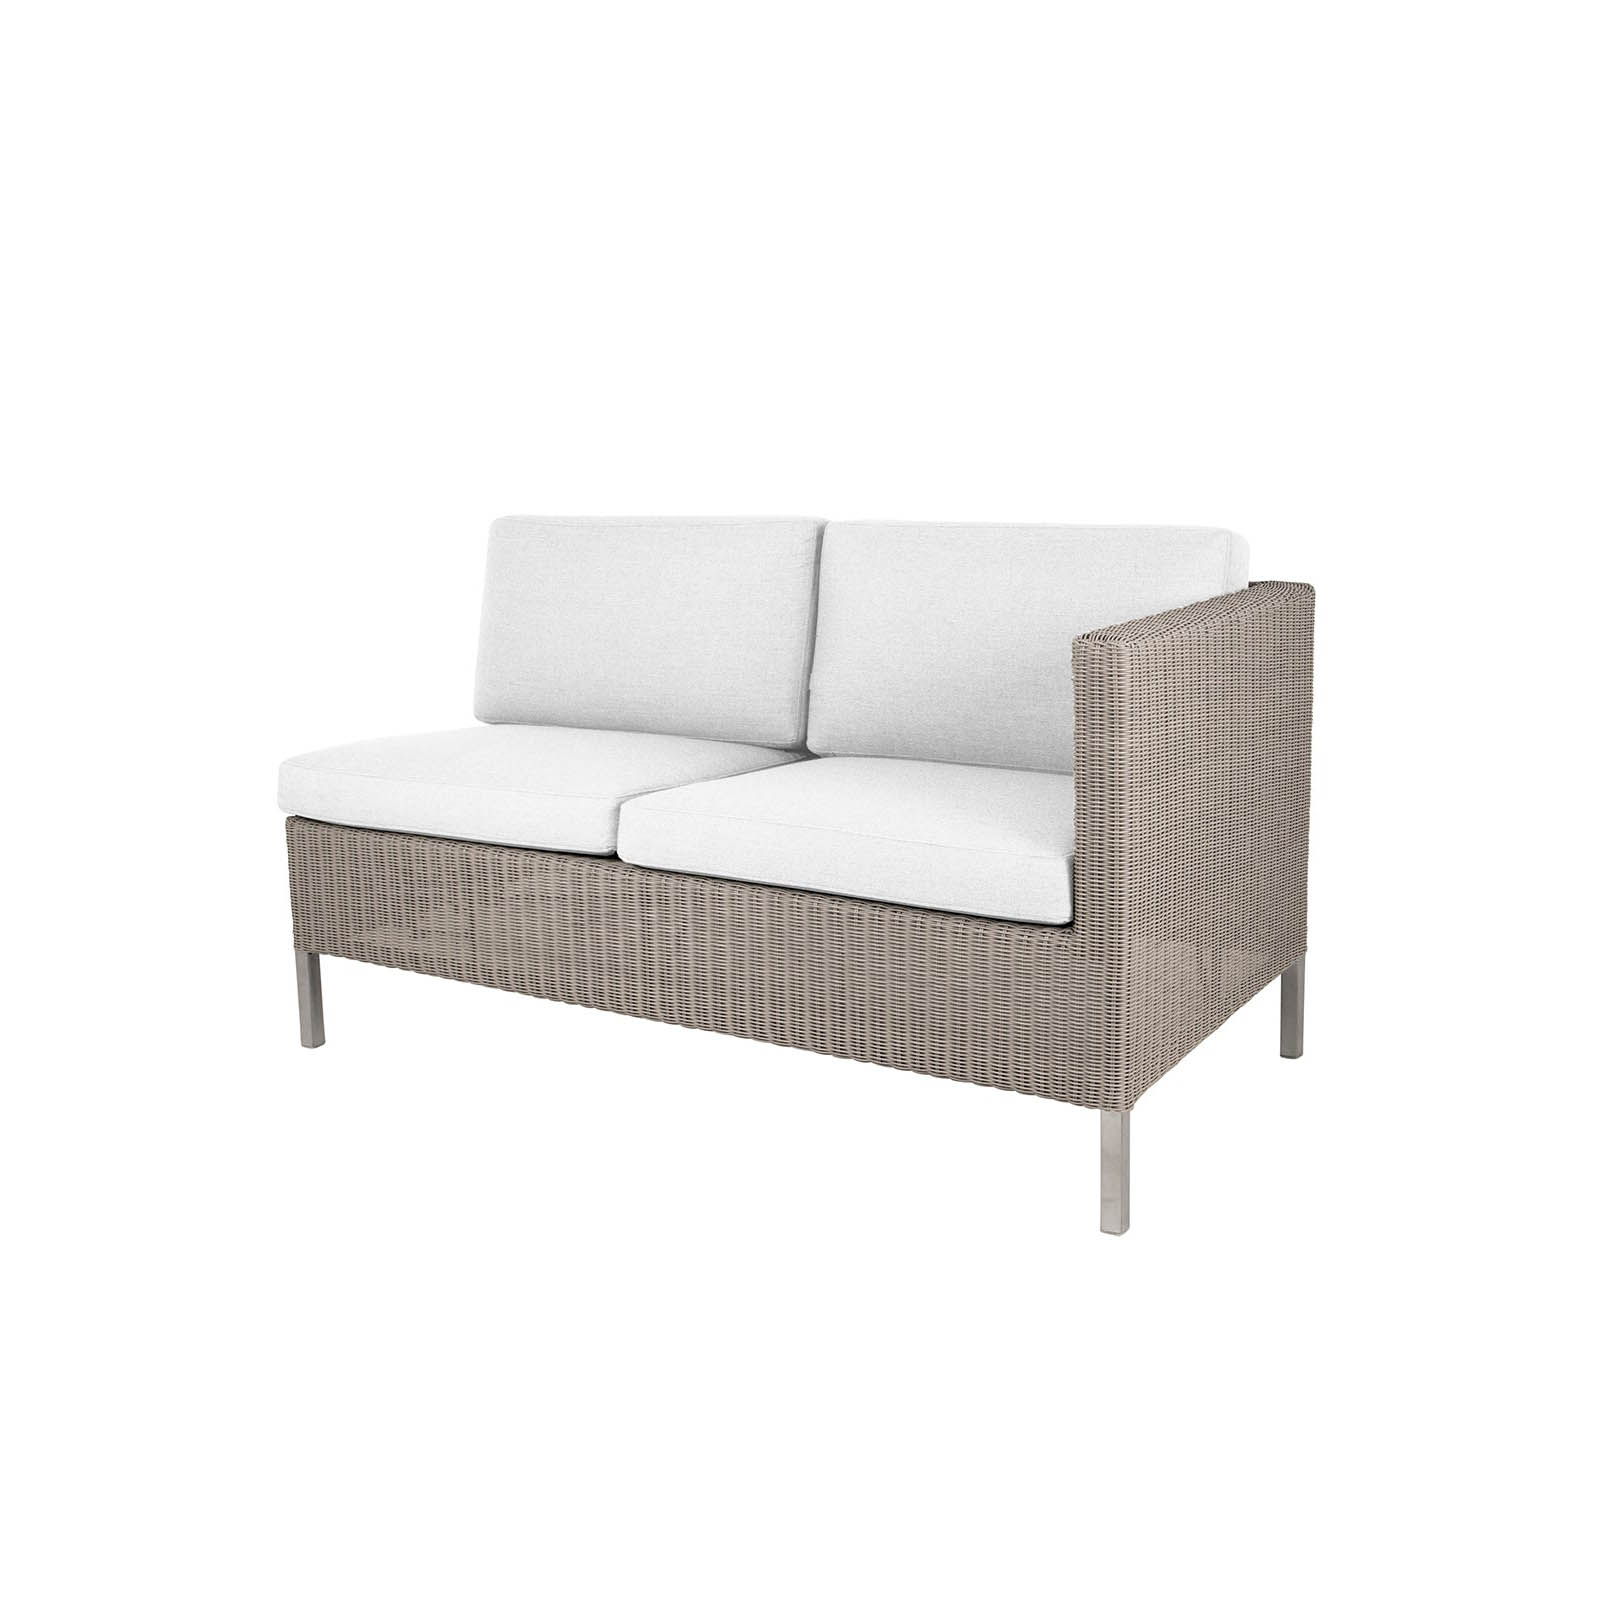 Connect Dining Lounge 2-Sitzer ModulSofa links aus Cane-line Weave in Taupe mit Kissen aus Cane-line Natté in Taupe